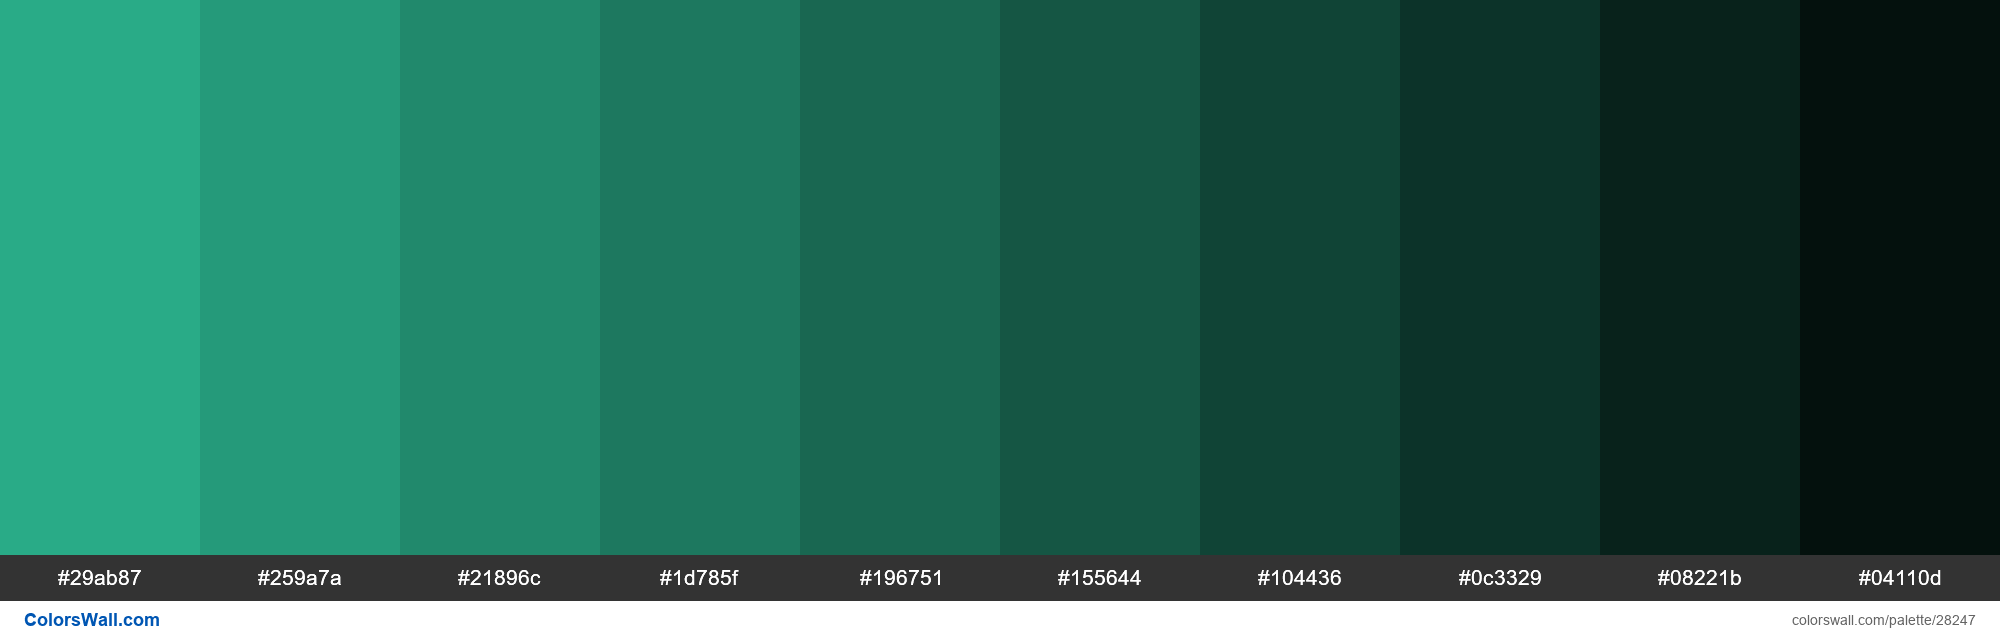 colorswall on X: Shades of Jungle Green color #29AB87 hex #29ab87,  #259a7a, #21896c, #1d785f, #196751, #155644, #104436, #0c3329, #08221b,  #04110d #colors #palette   /  X